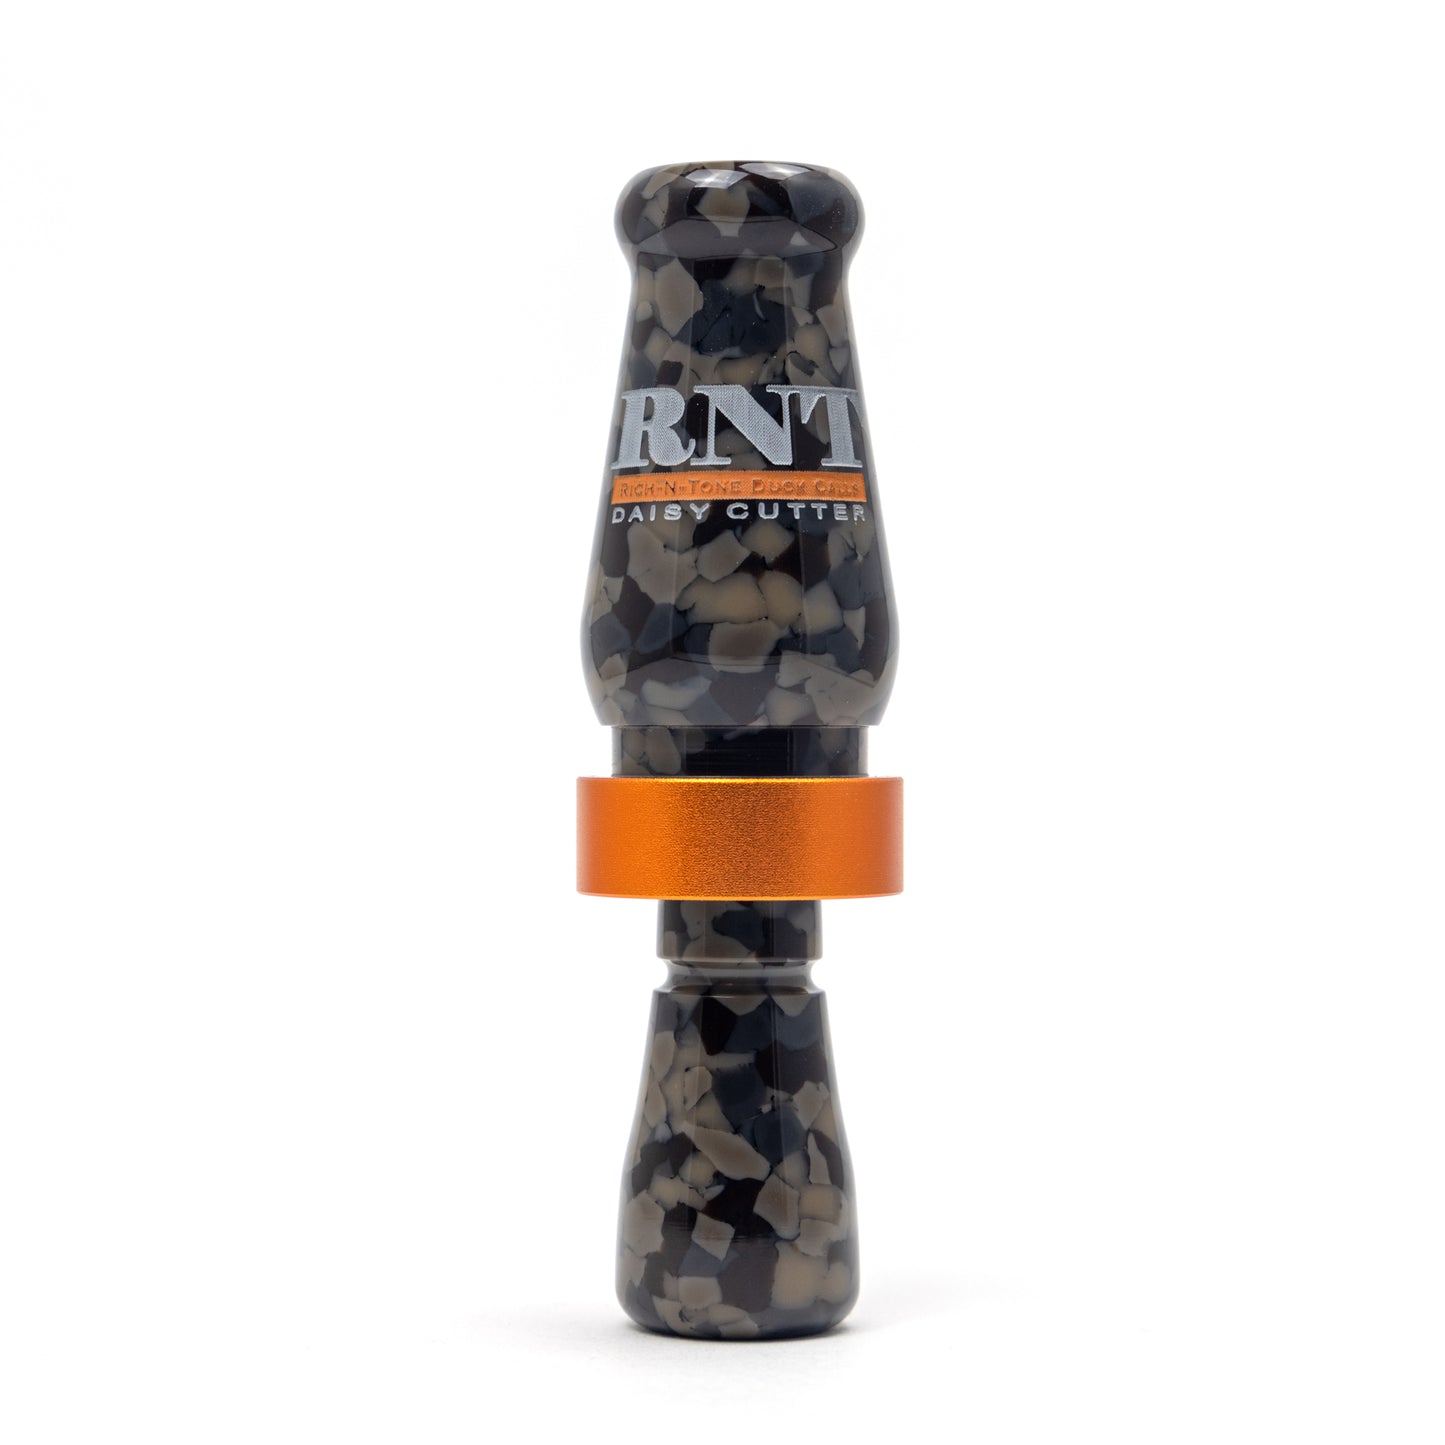 24.7 / RNT Collab Daisy Cutter - Timber Camo - Limited Quantities